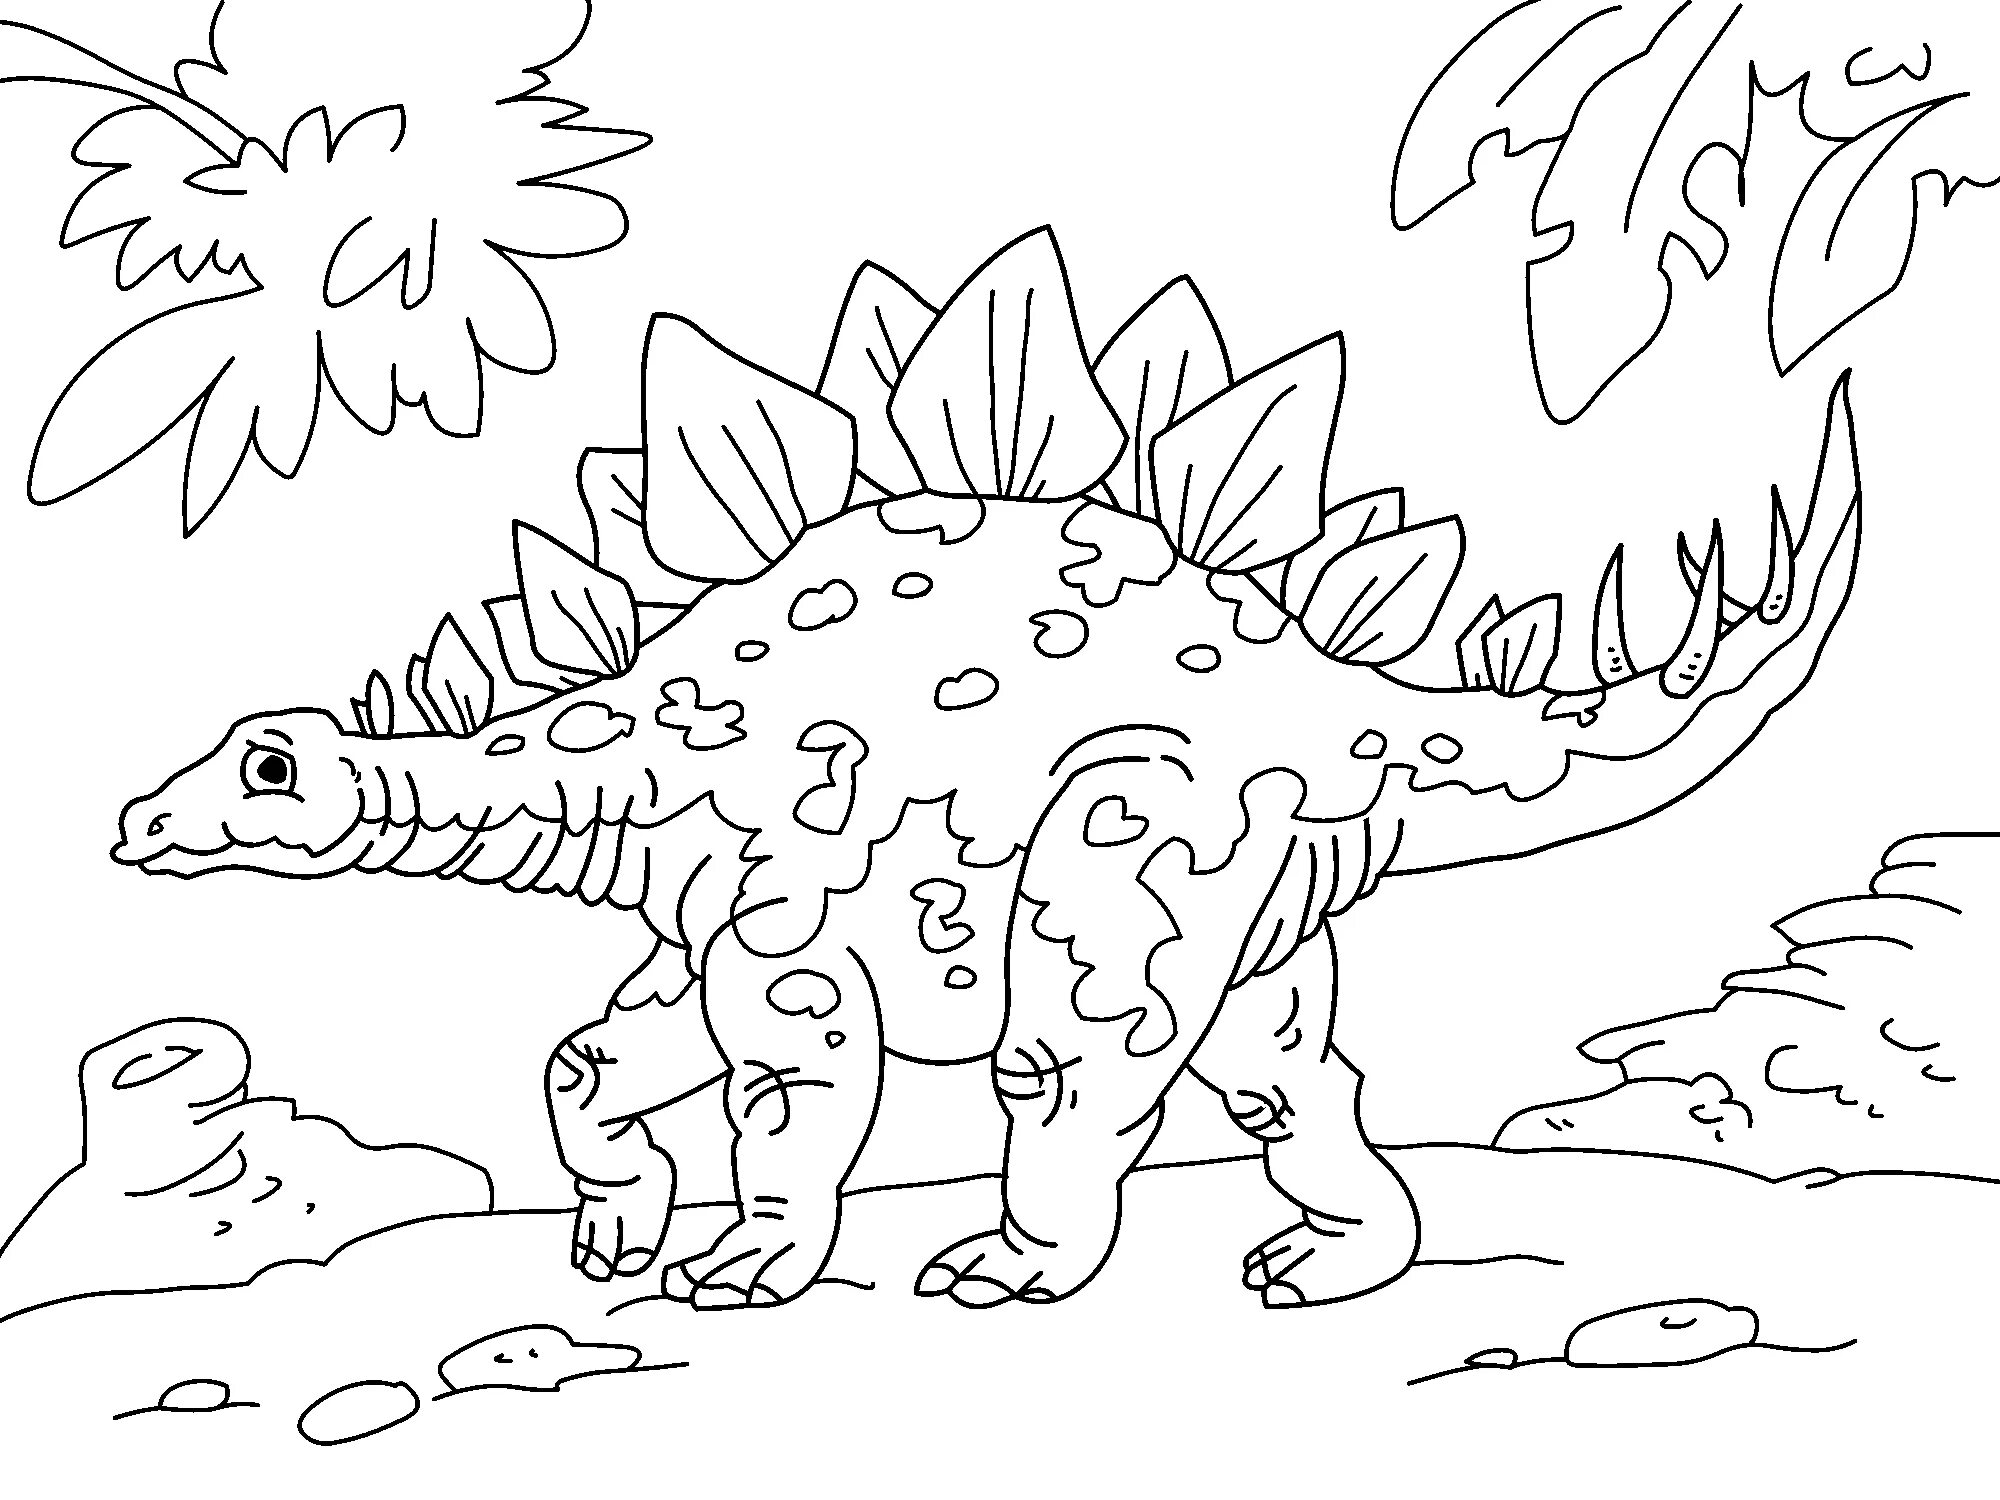 Dinosaurs for 5 year olds #15